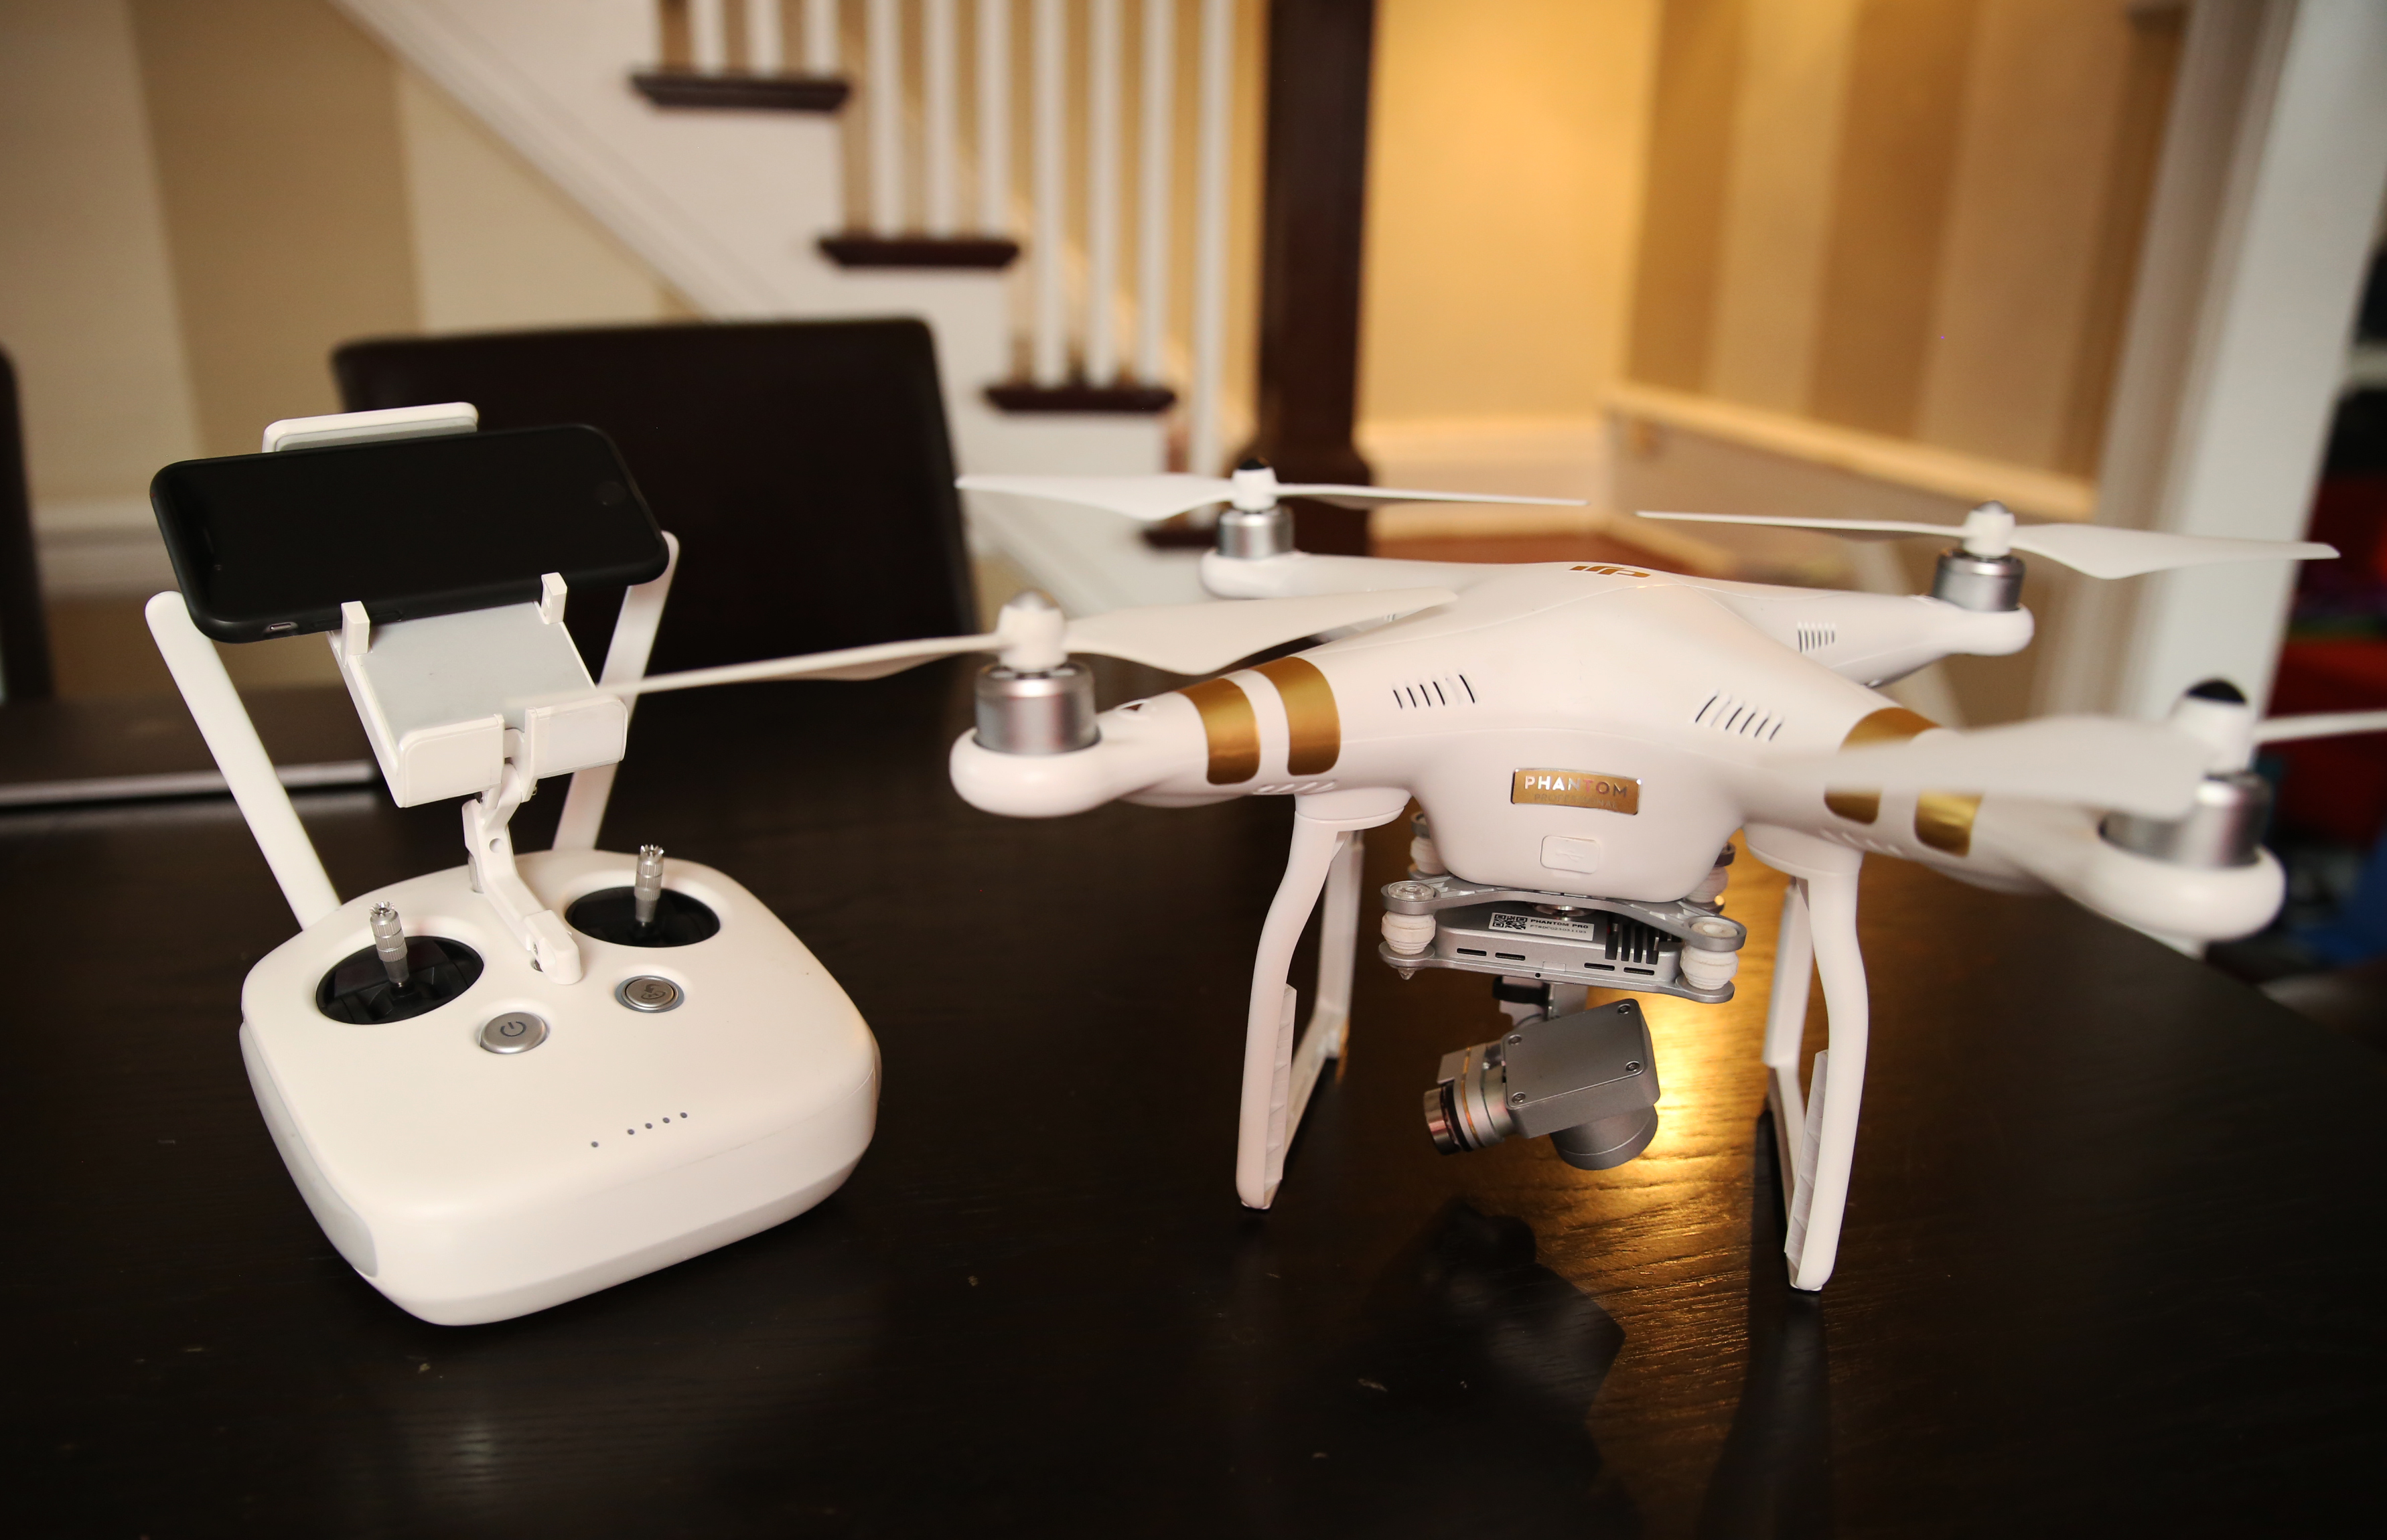 The DJI Phantom 3 Professional Is The Easiest Drone I've Ever 